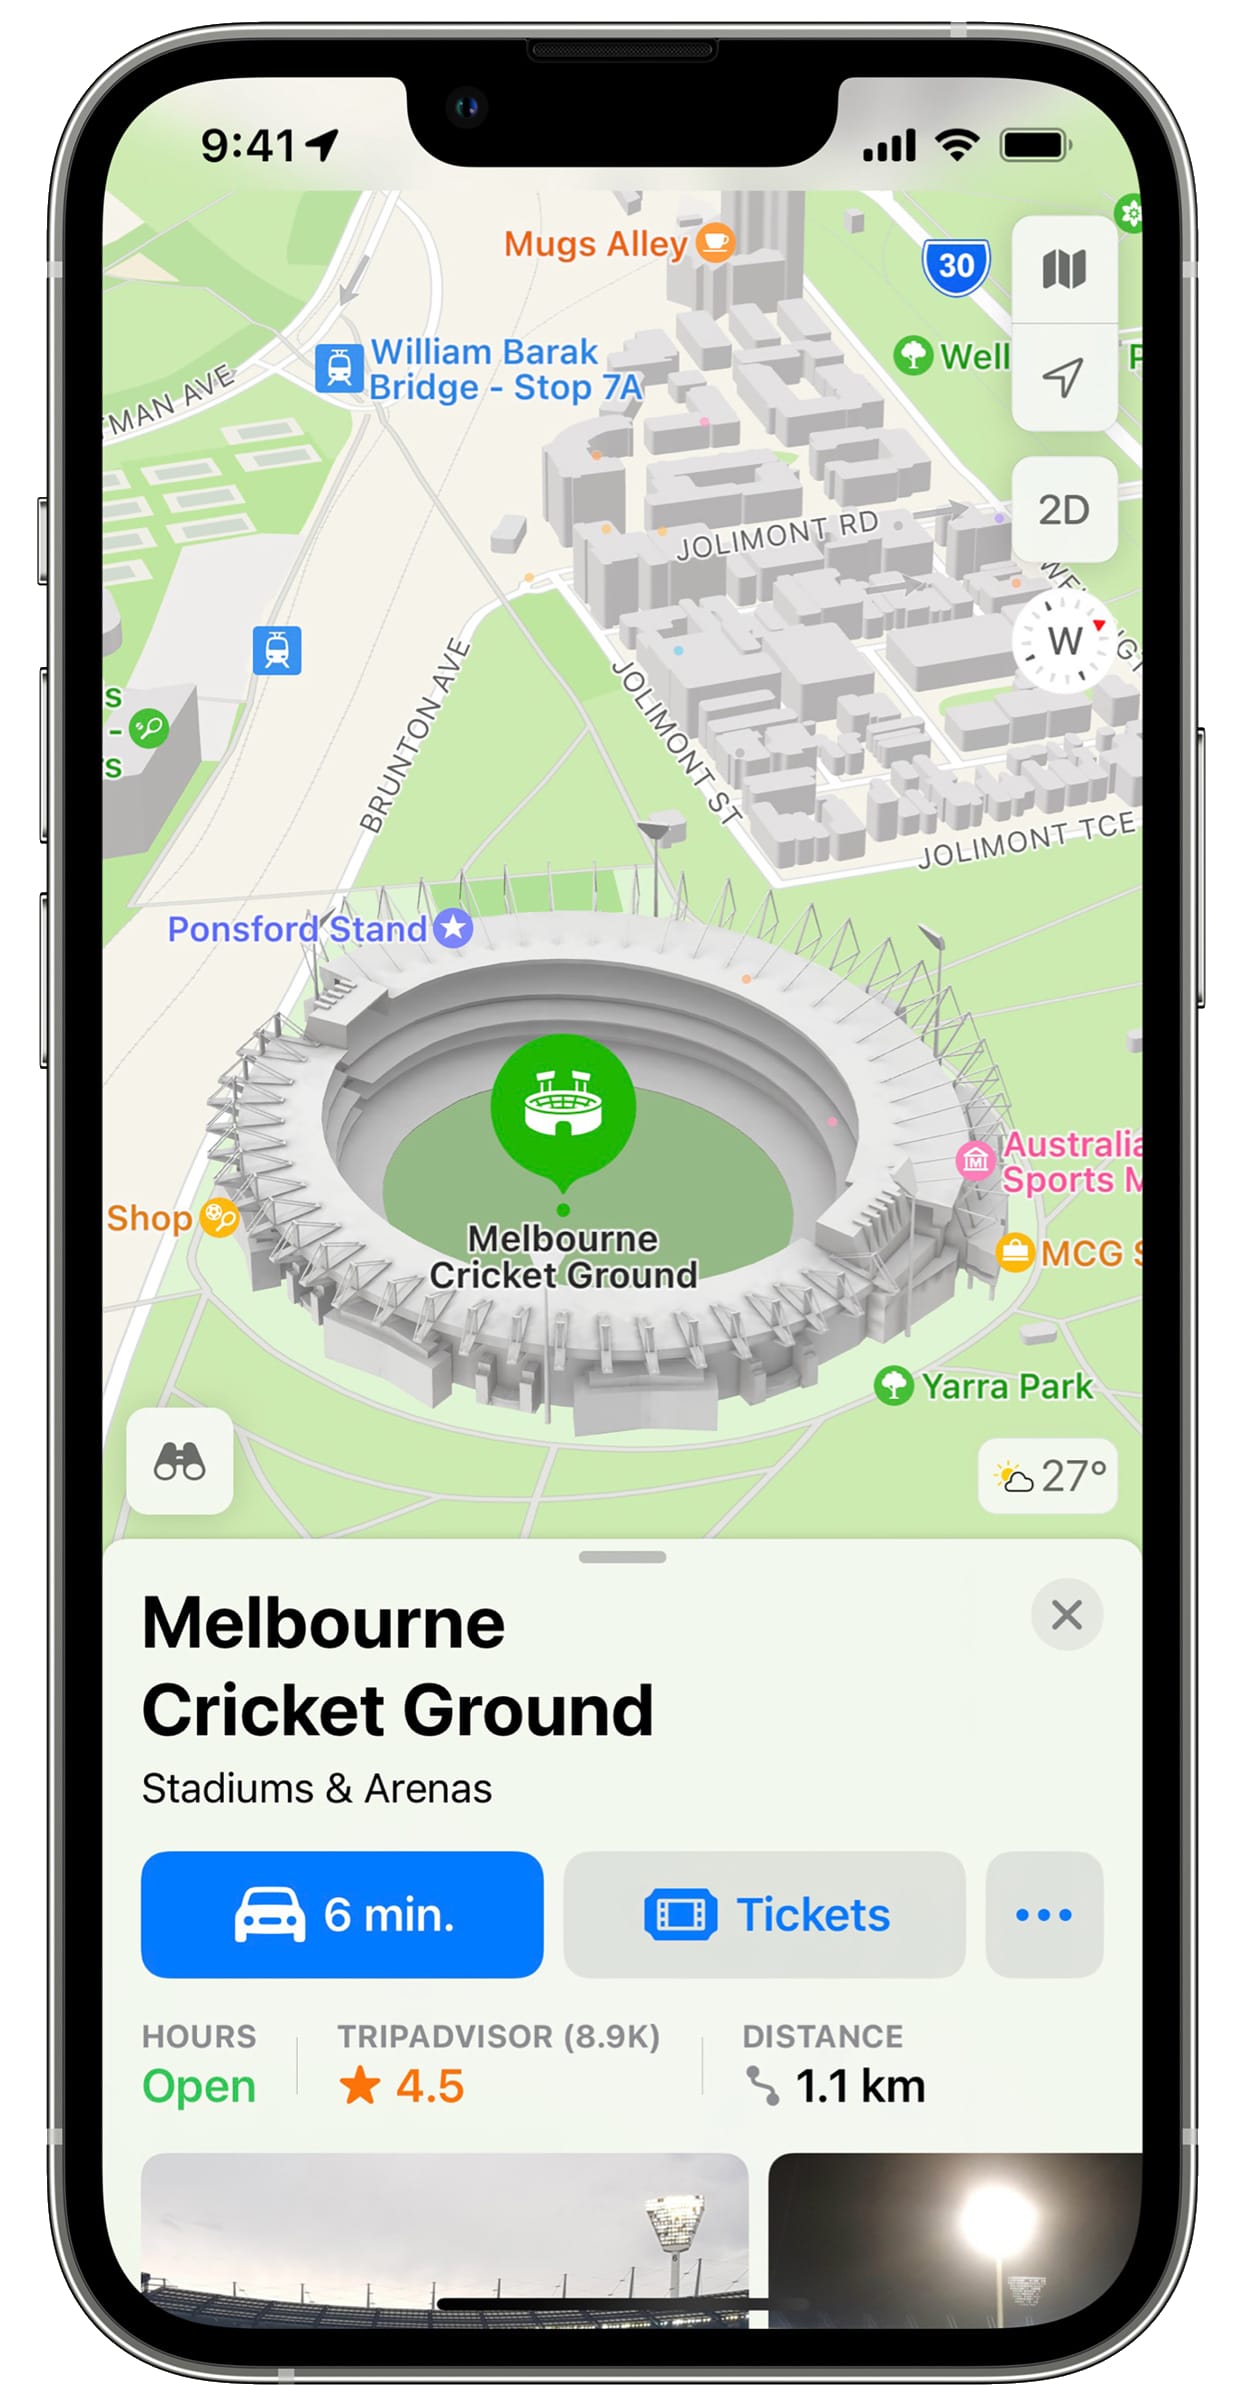 iPhone screenshot showing Melbourne CricketGround in 3D on Apple Maps in Australia